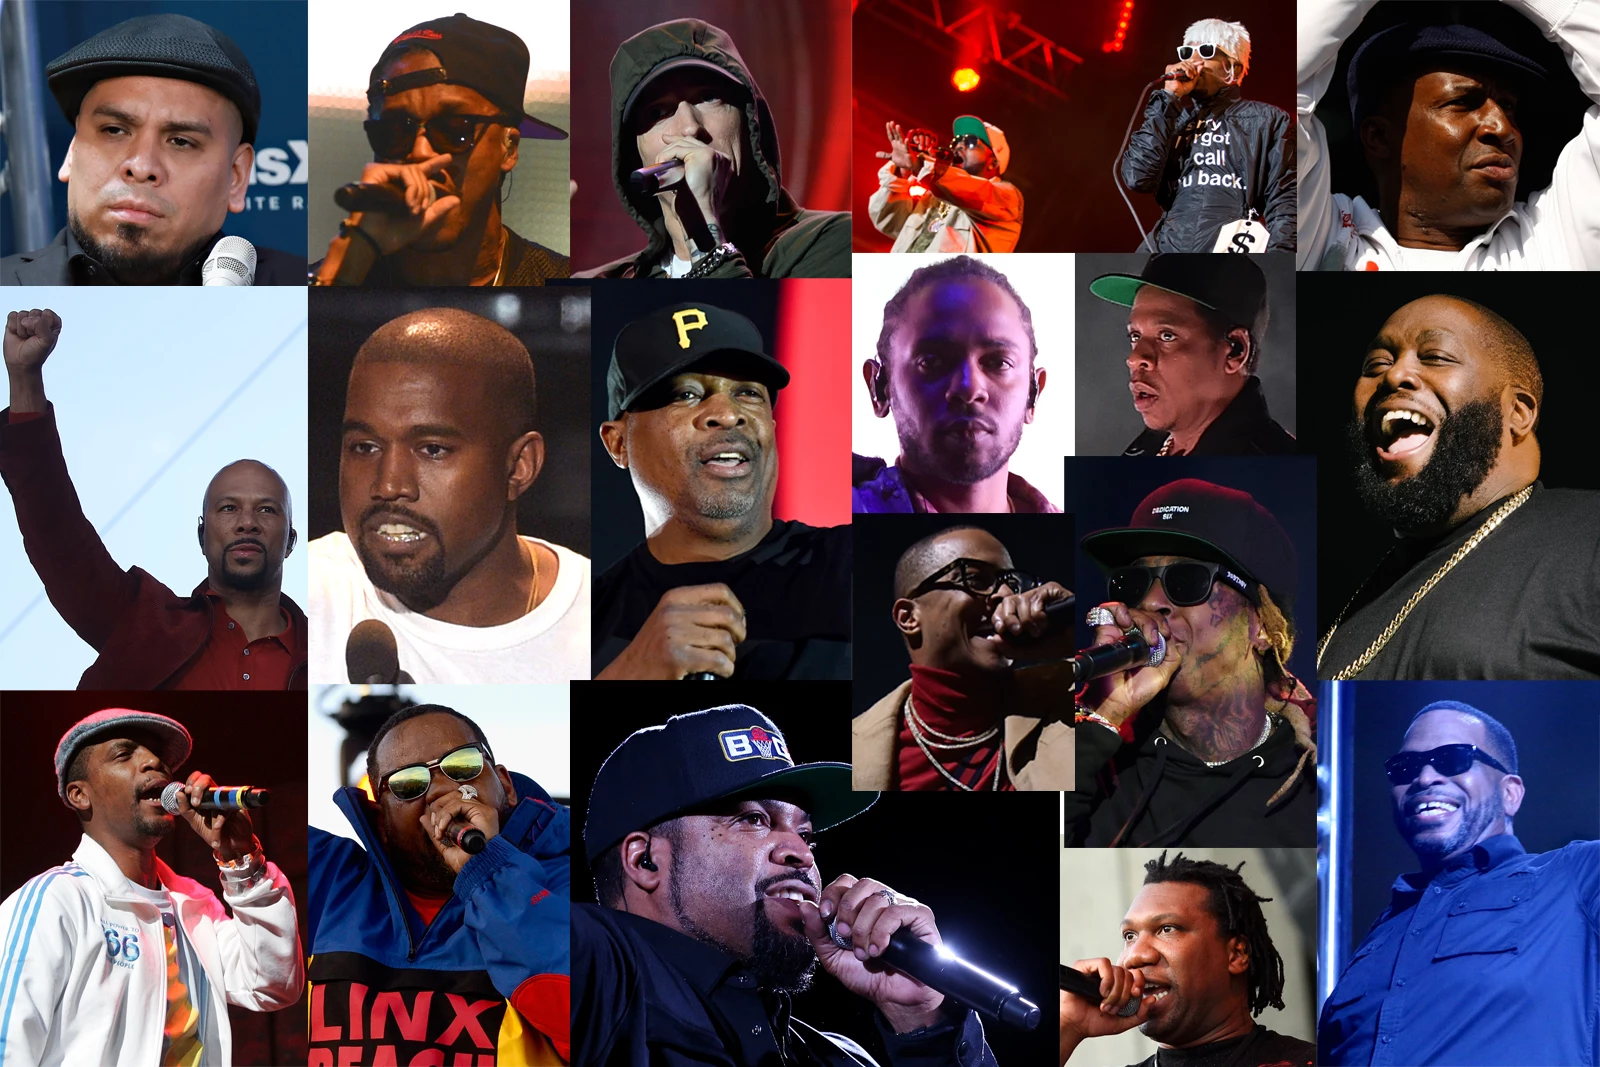 28 Rap Songs From the 'Other America'